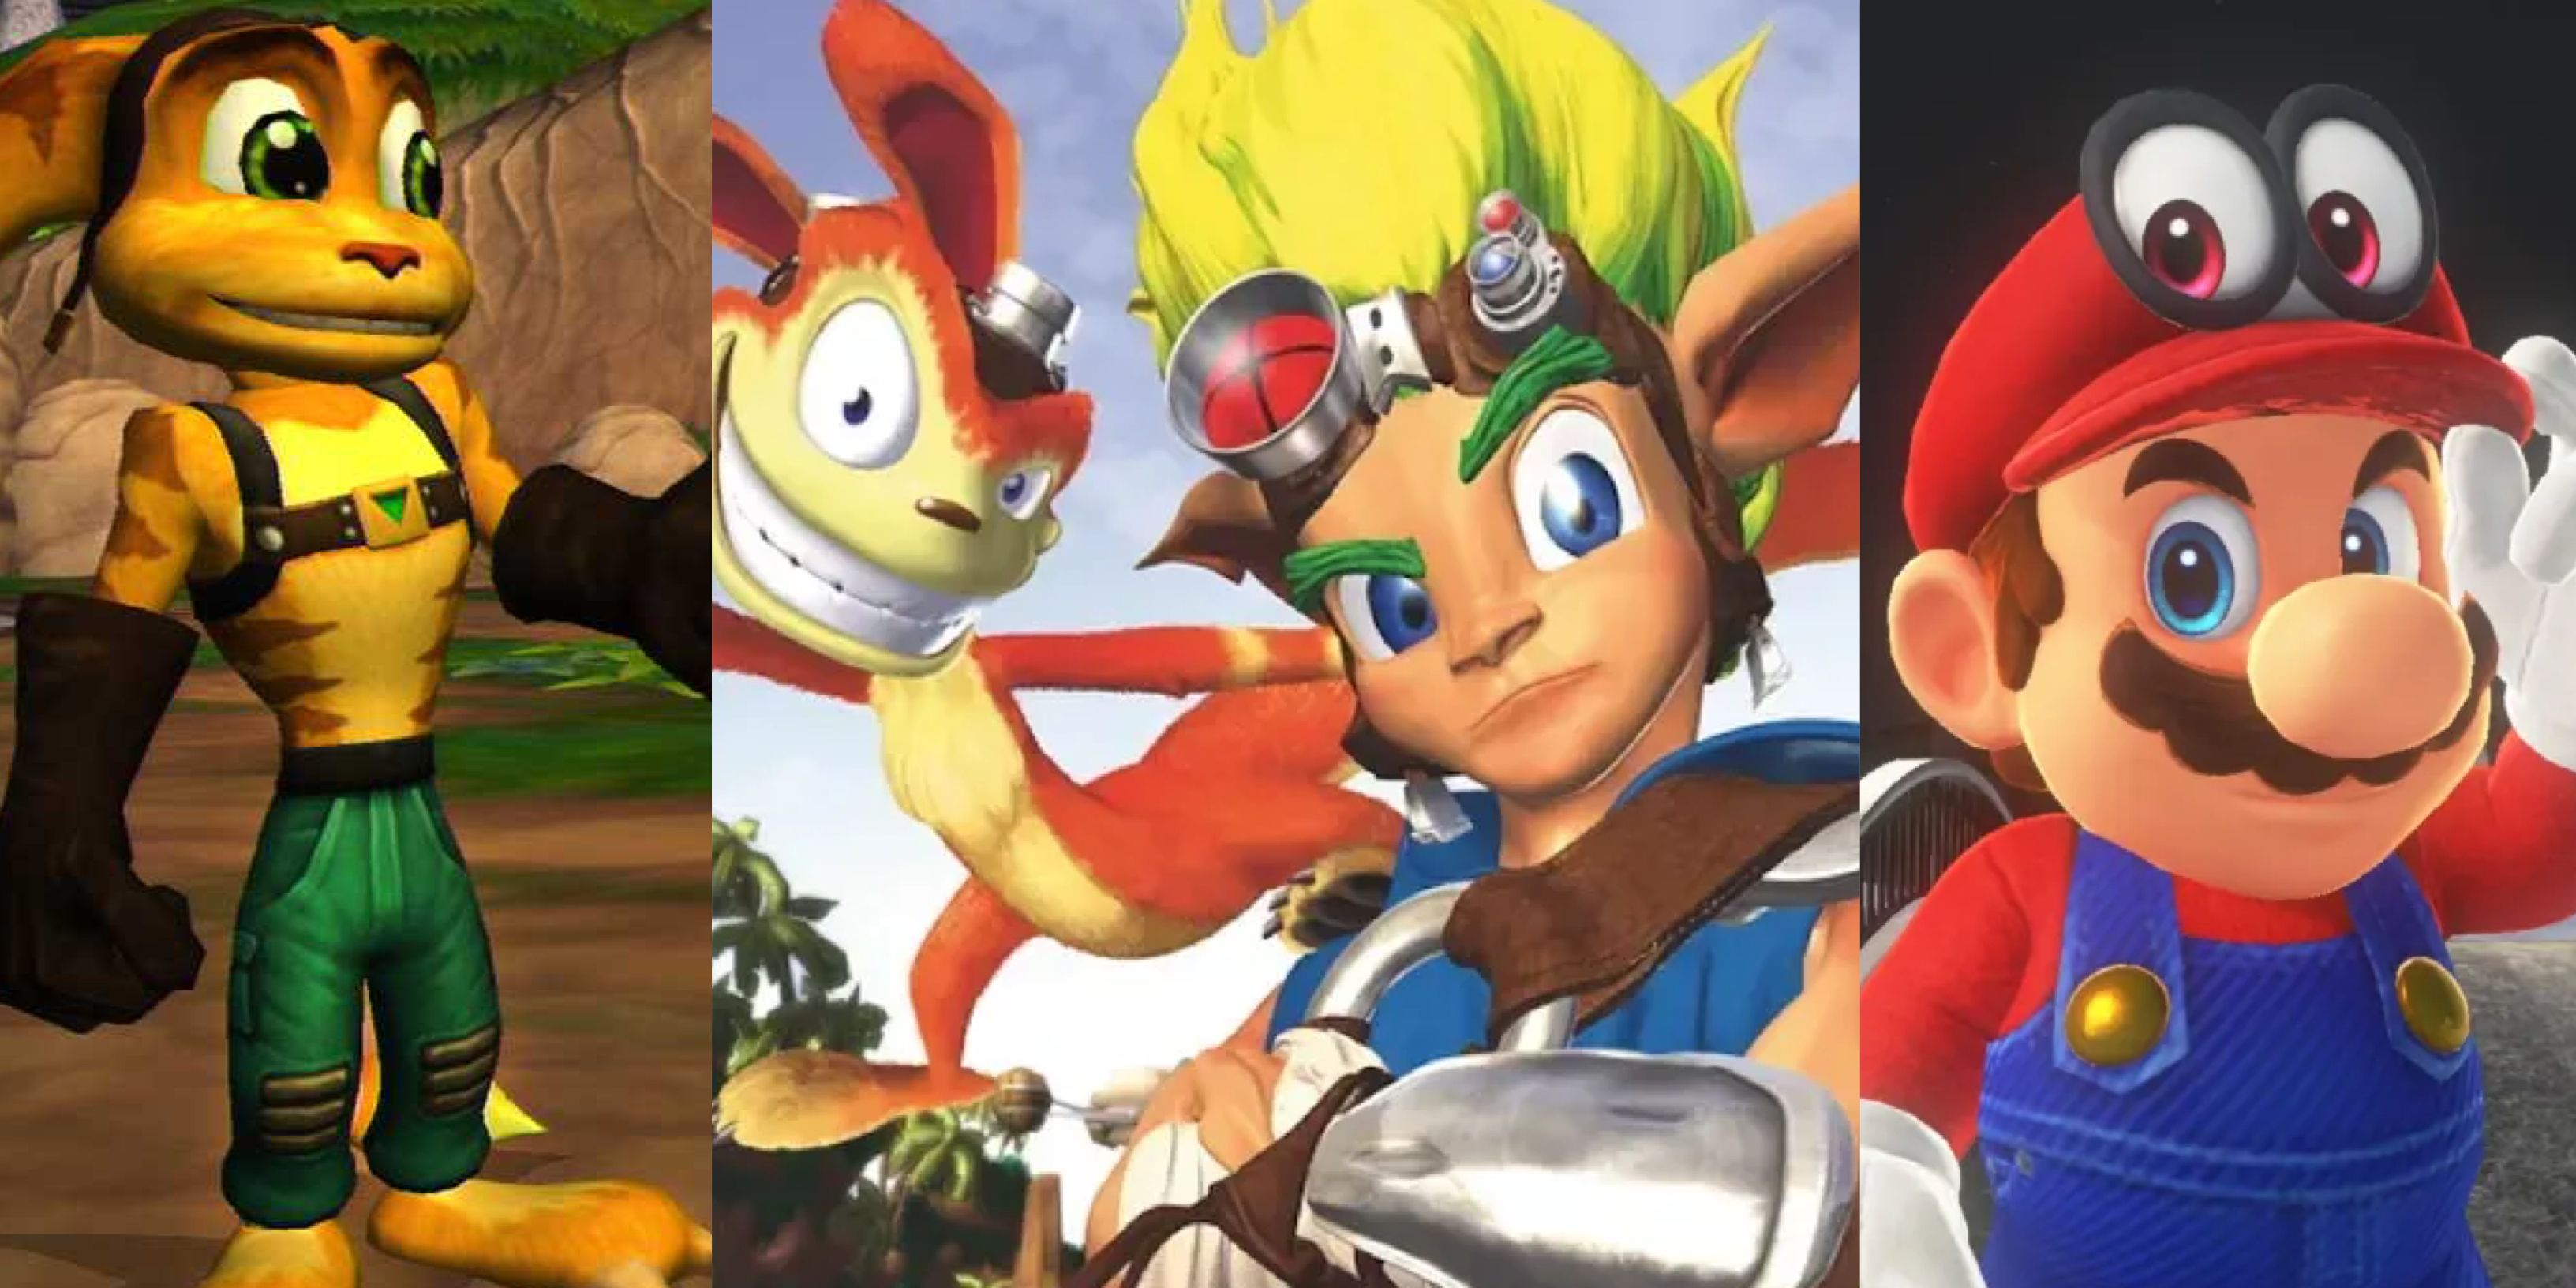 Best 3D Platformers for Combat: Ratchet and Clank (left), Jak and Daxter: The Precursor Legacy (middle), and Super Mario Odyssey (right)